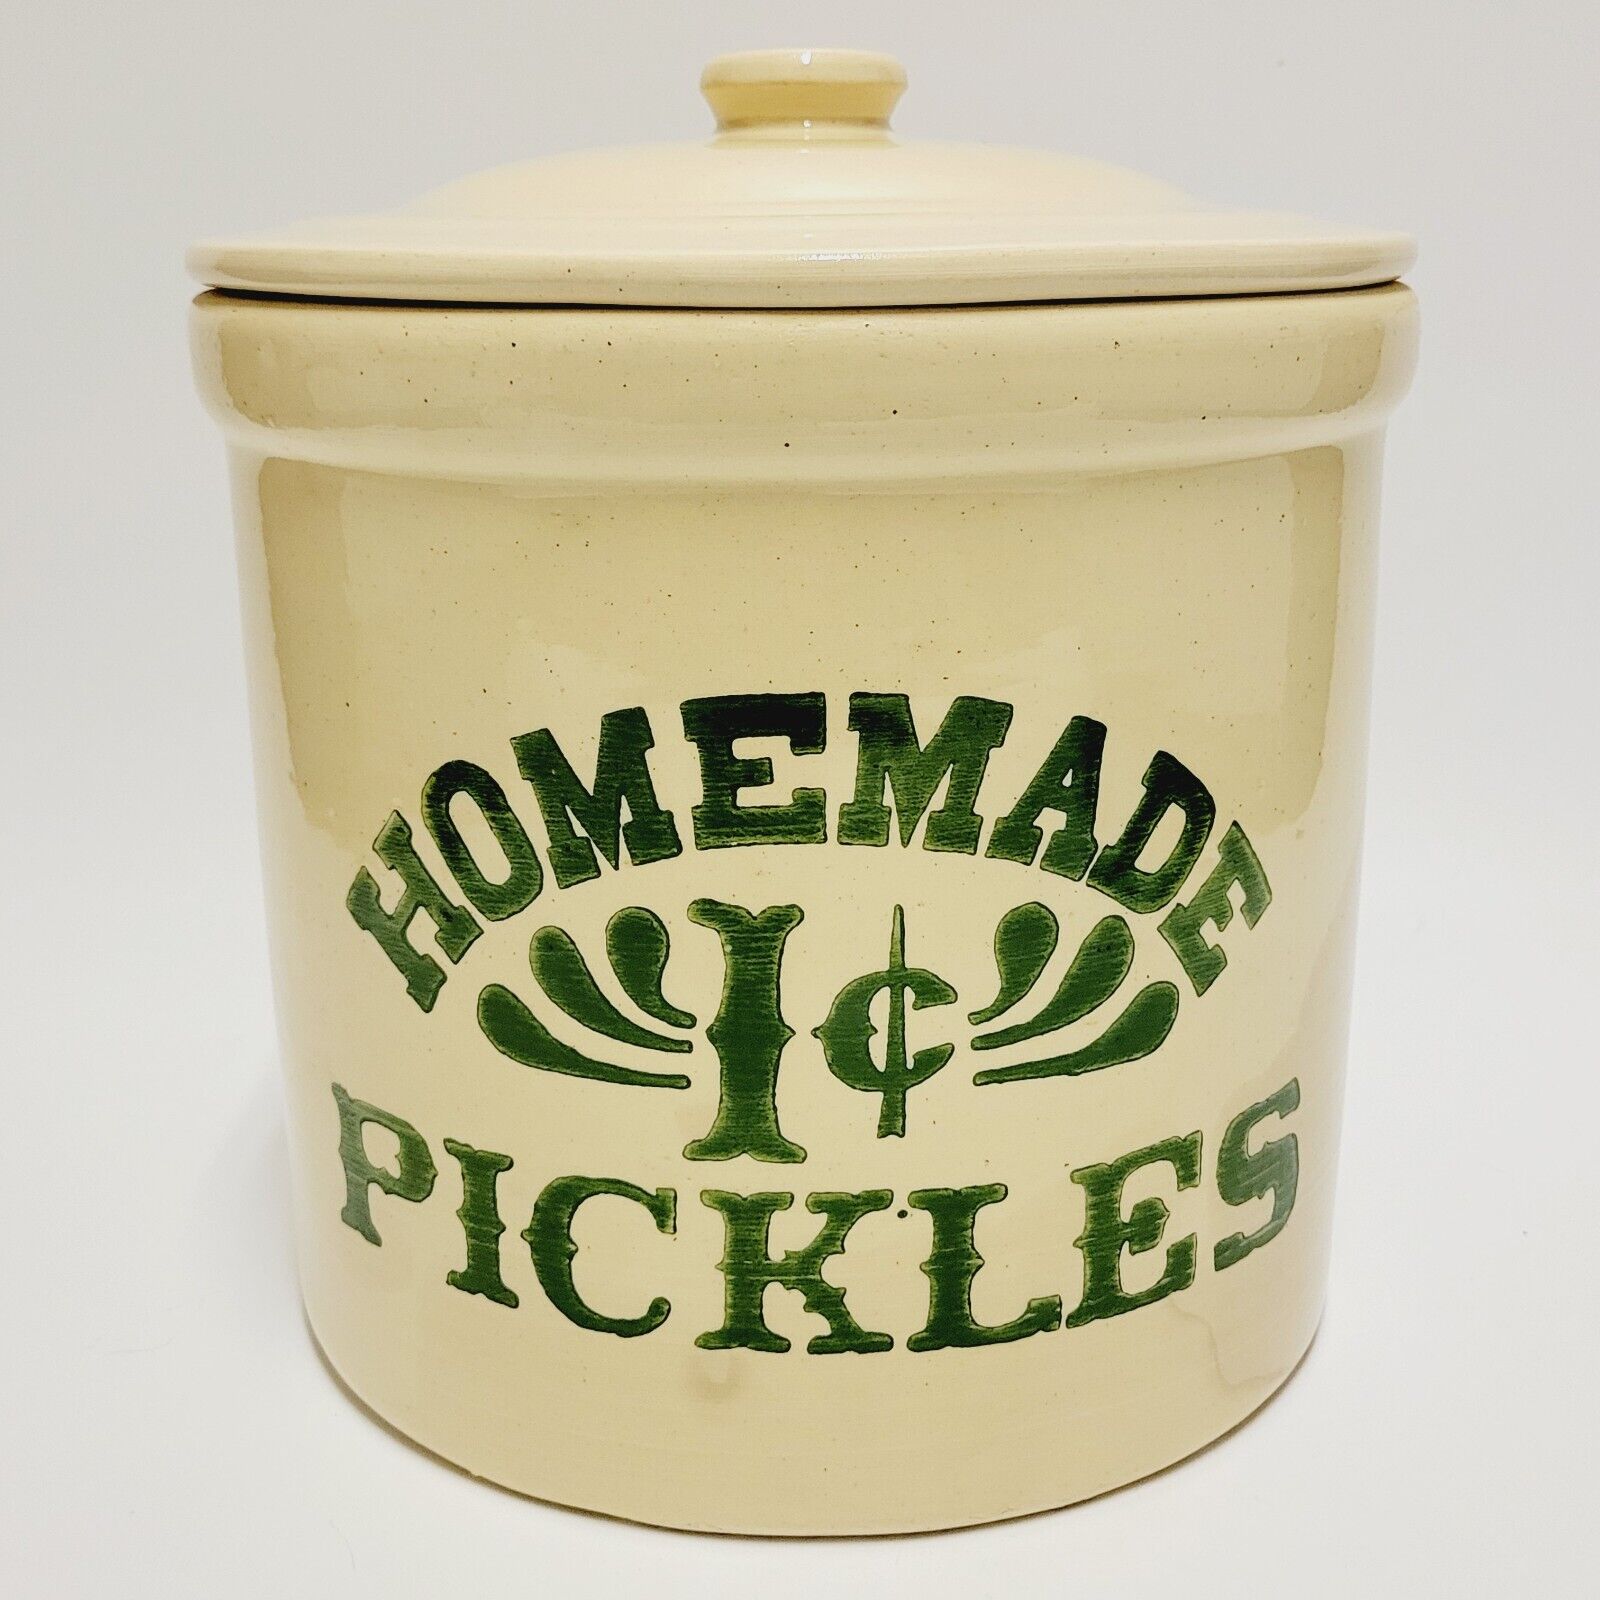 Vintage Homemade Pickles Crock w/ Lid 2 Gallons USA - Friends Monicas Kitchen